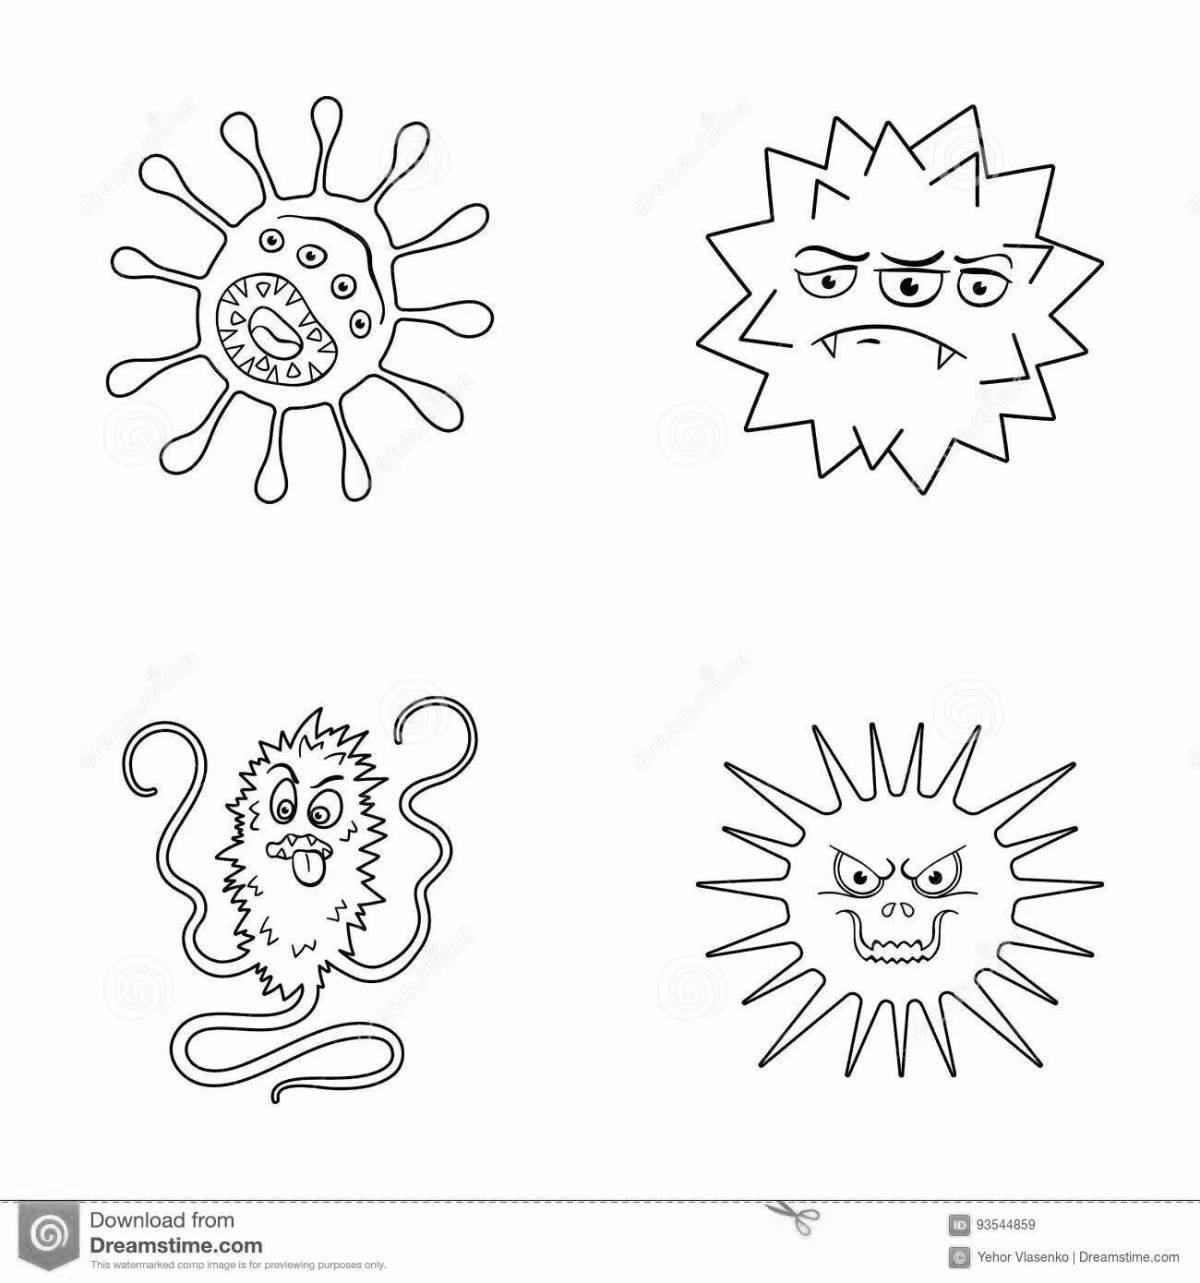 Cute germs and bacteria coloring book